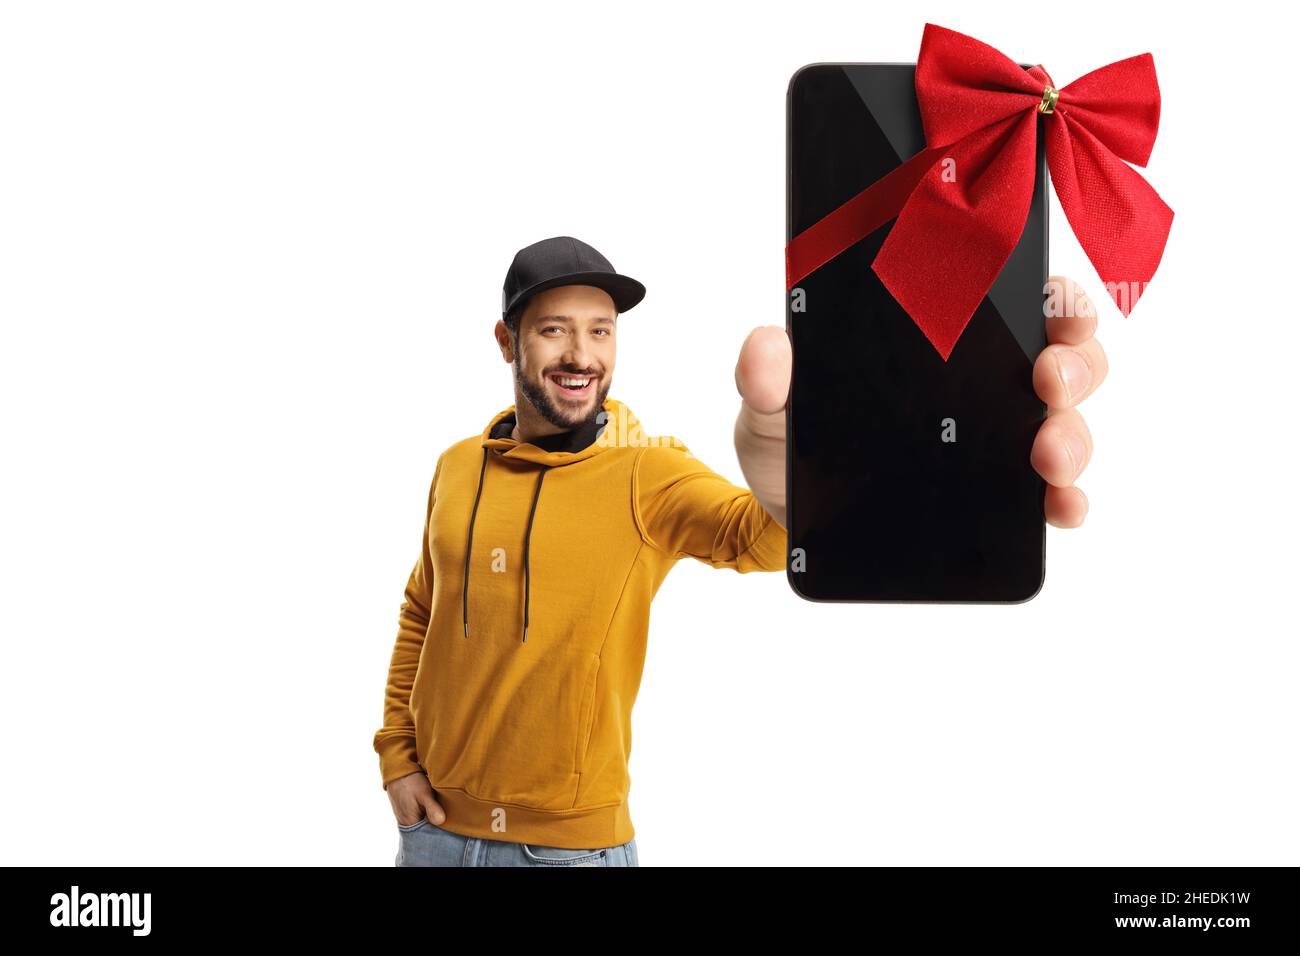 Cheerful young man with a yellow sweatshirt holding a smartphone with a red ribbon bow isolated on white background Stock Photo